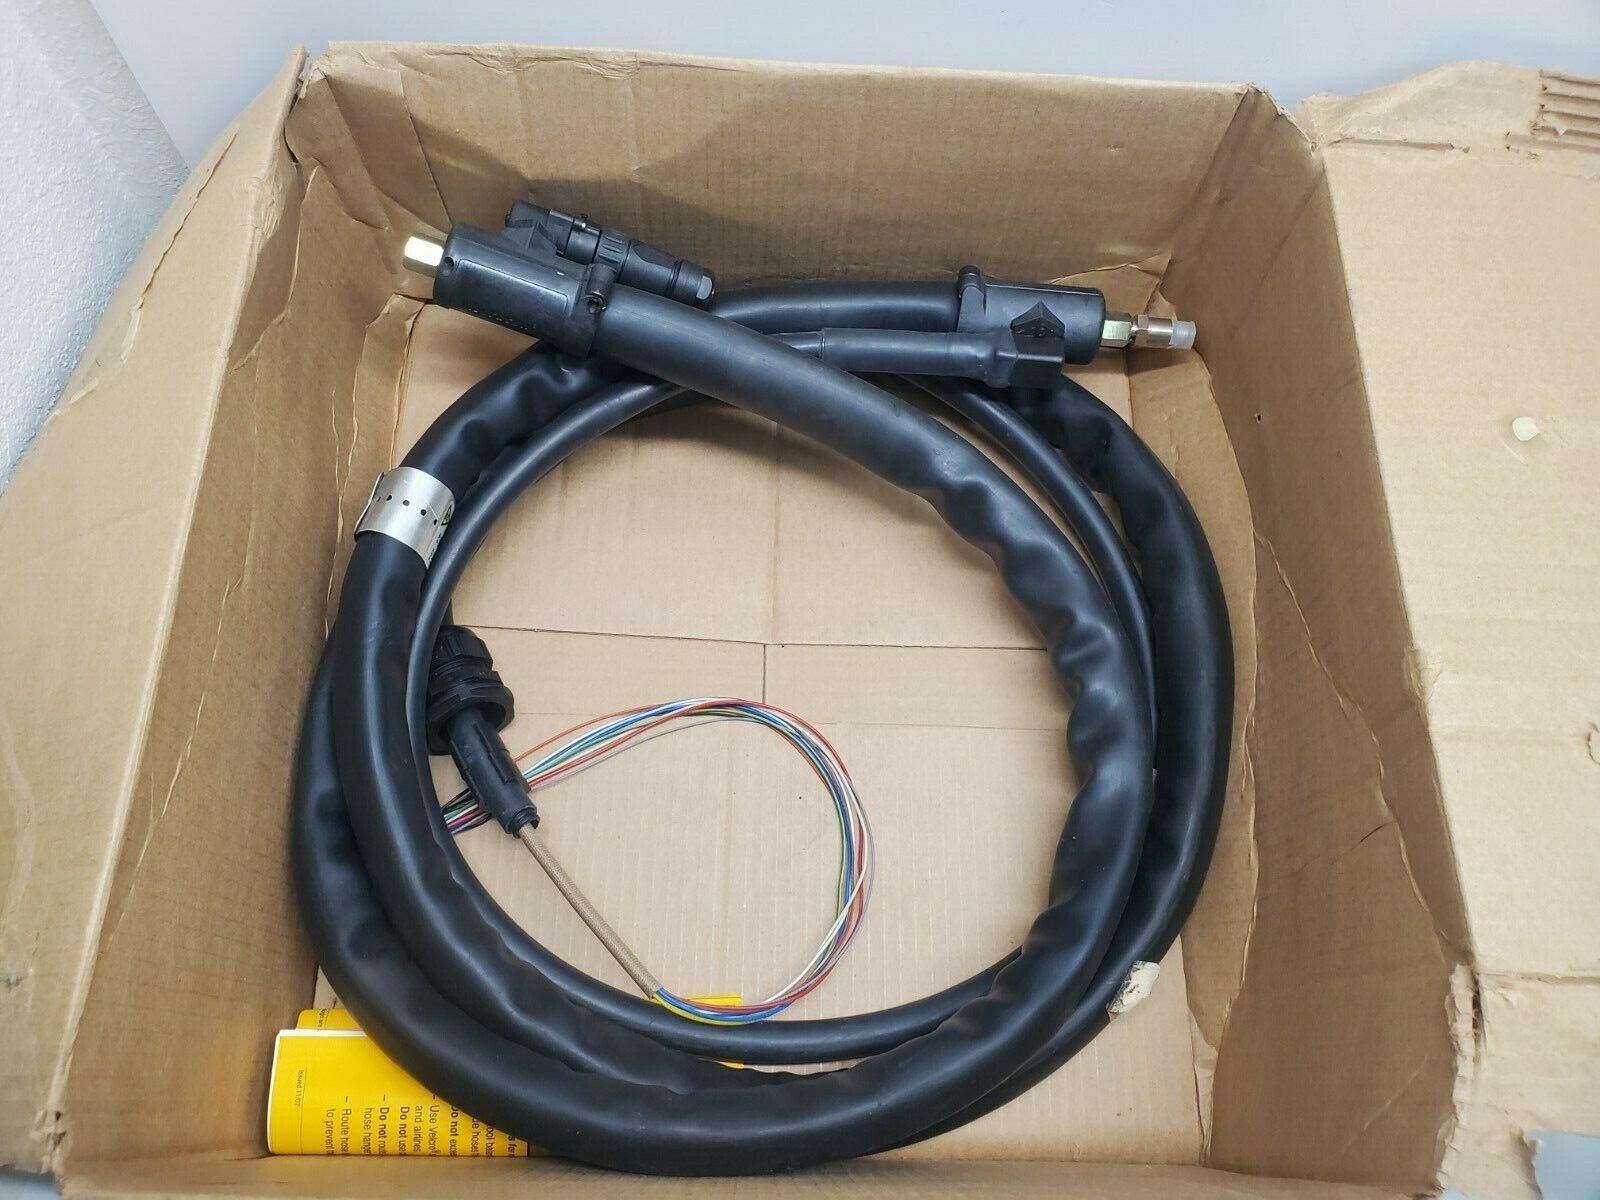 NEW IN BOX NORDSON 240V 282W 1500PSI HOT GLUE HOSE ASSEMBLY 155007D